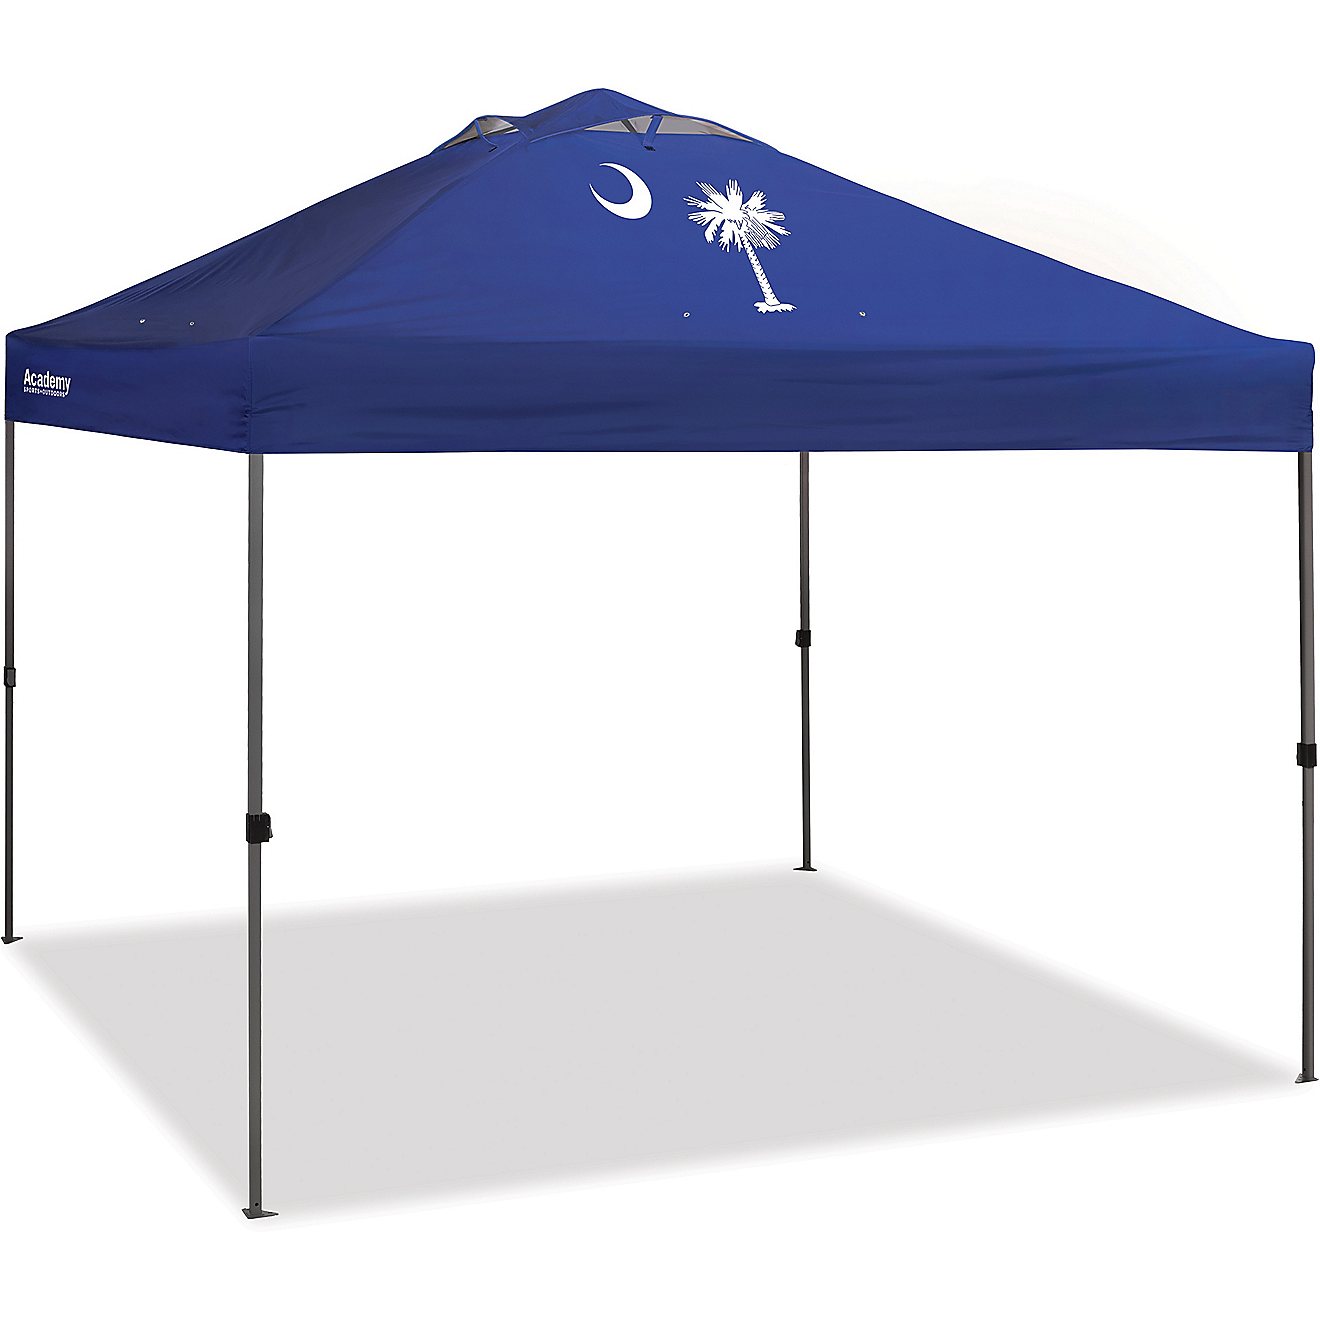 Academy Sports + Outdoors 10 ft x 10 ft One Push Straight Leg South Carolina State Canopy                                        - view number 1